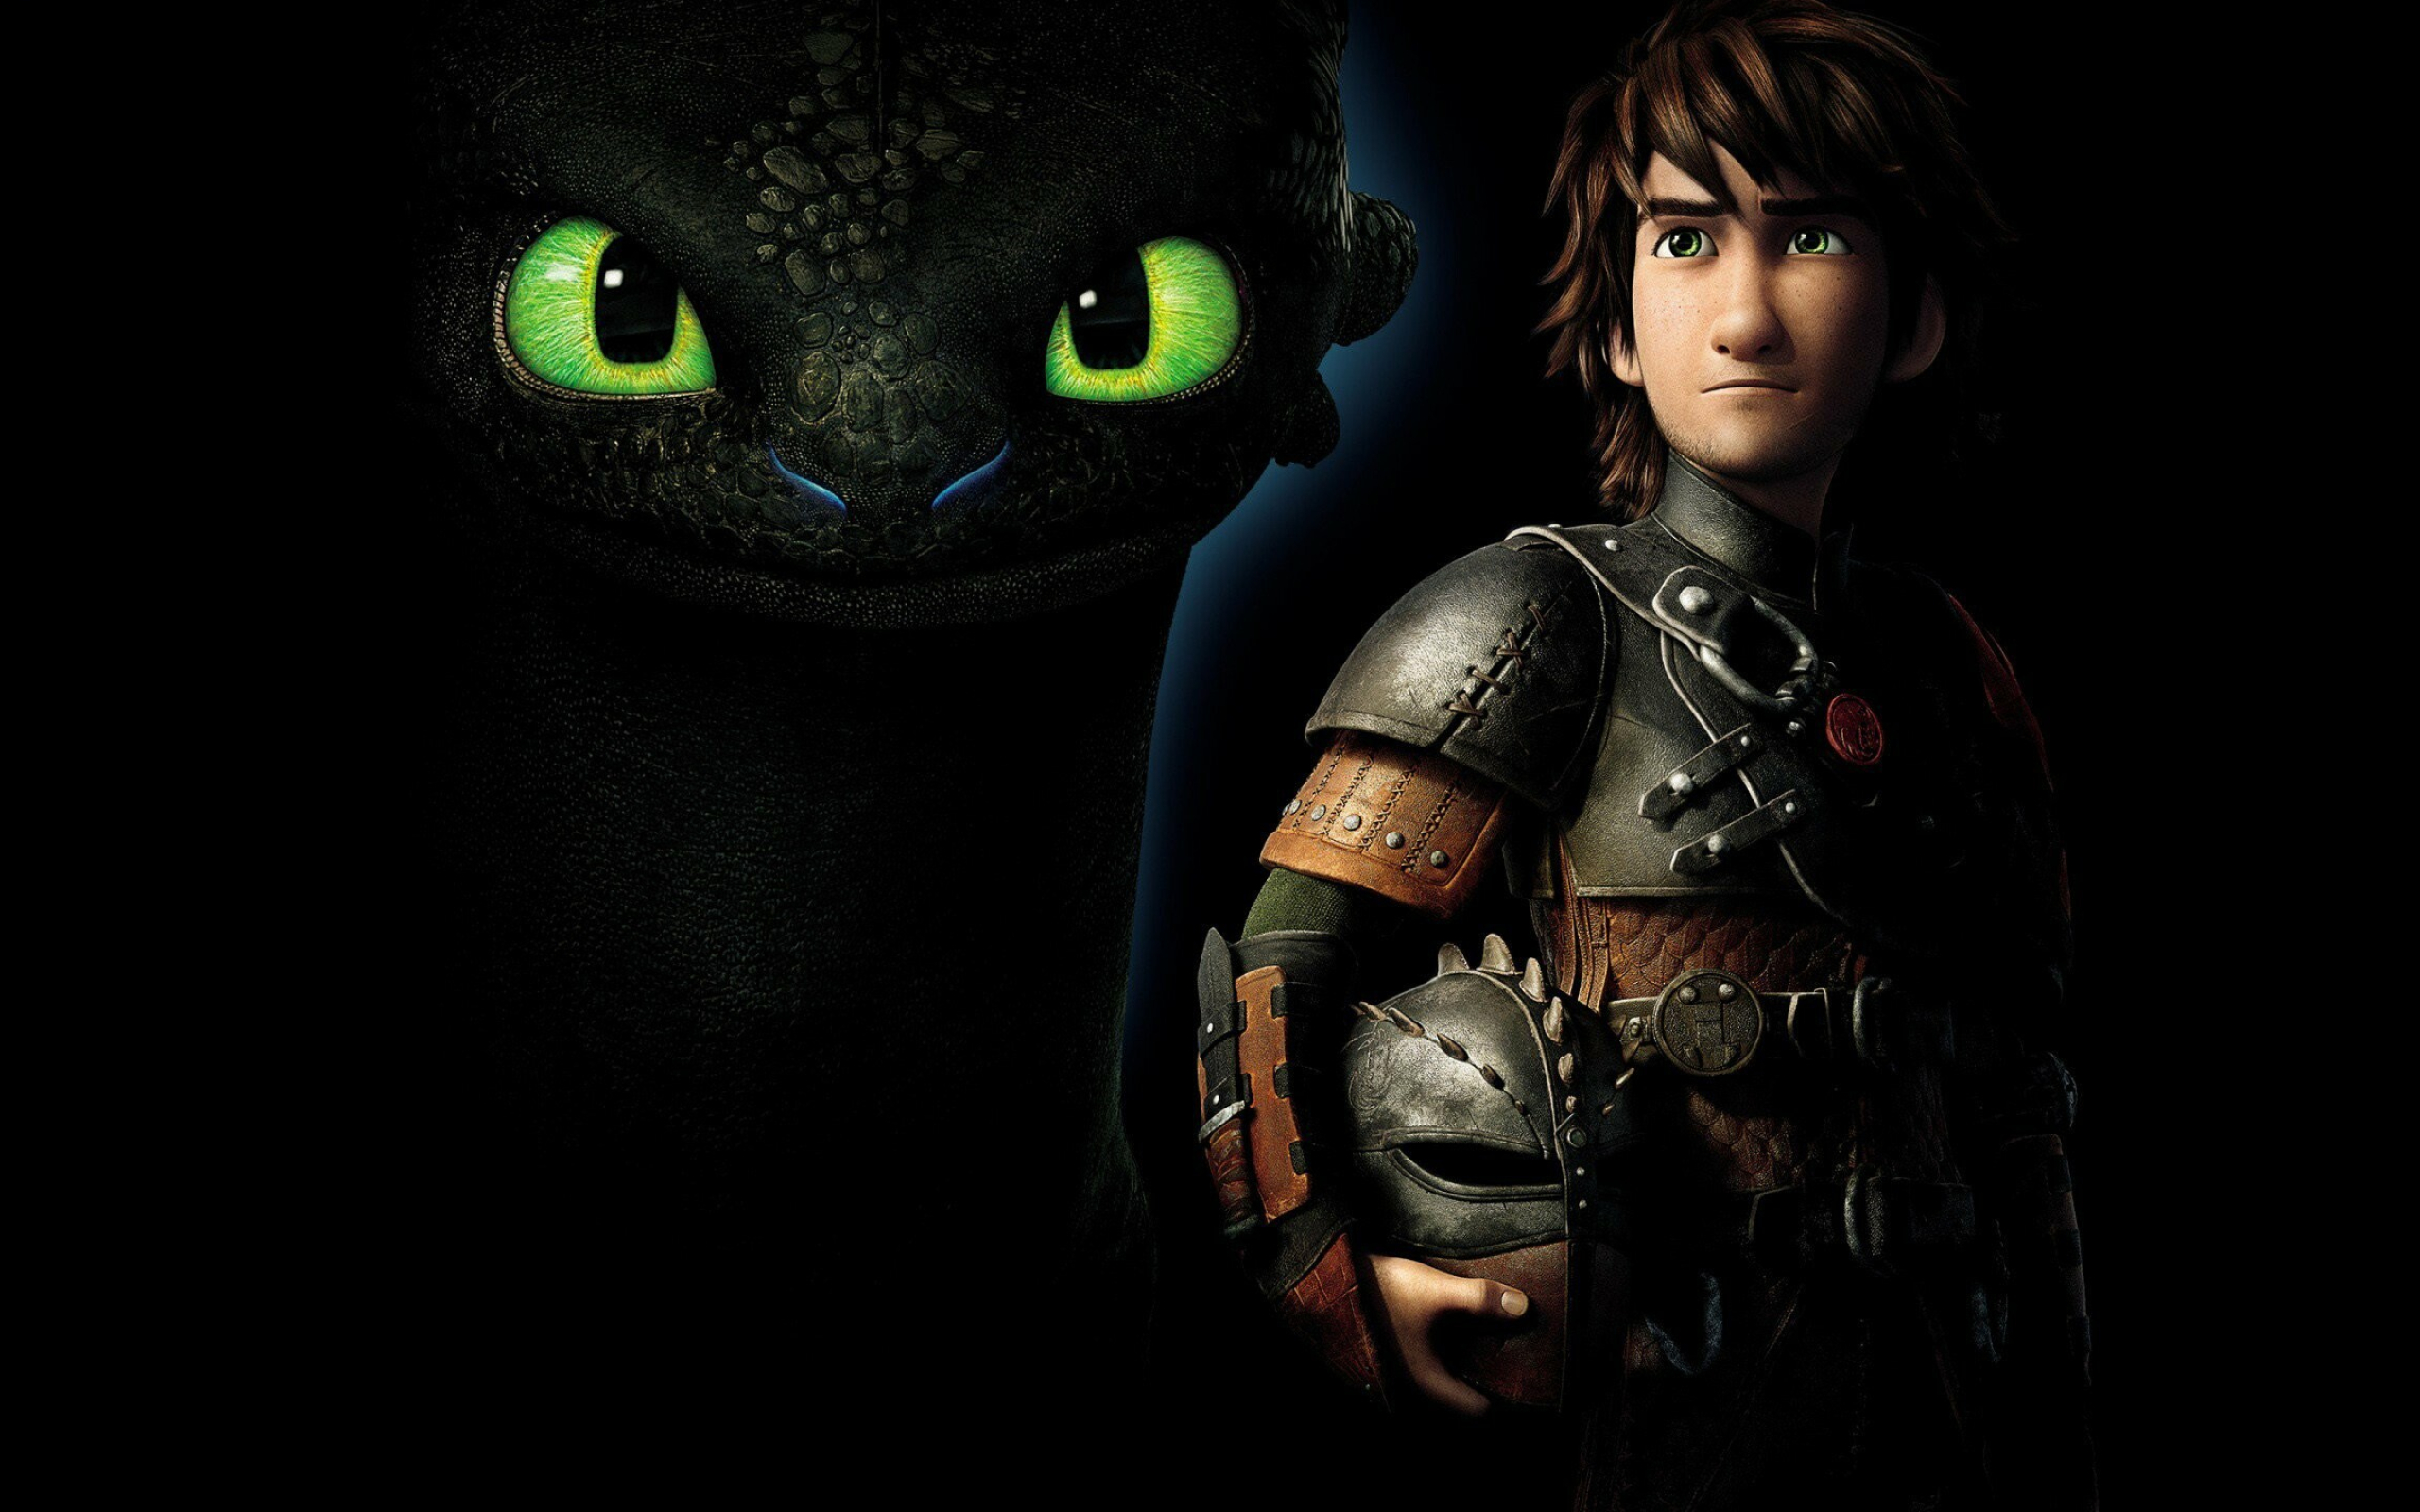 How to Train Your Dragon: Hiccup Horrendous Haddock III, The son of Stoick the Vast, The leader of the Viking island of Berk. 2560x1600 HD Wallpaper.